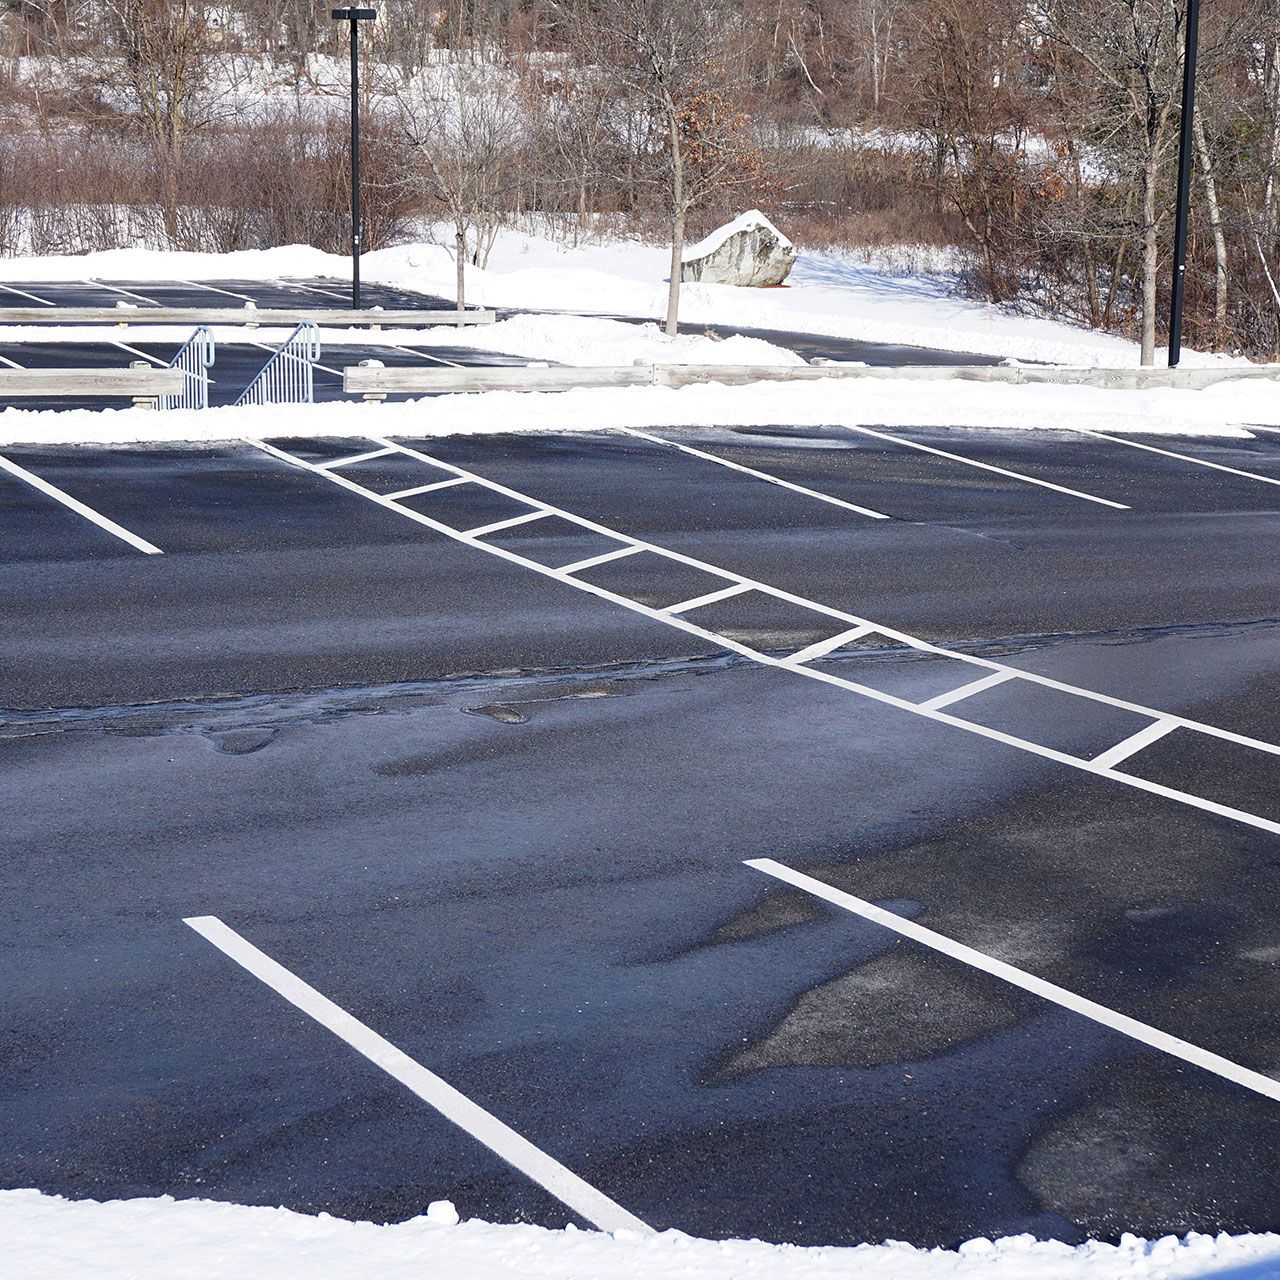 An empty parking lot with snow on the ground.